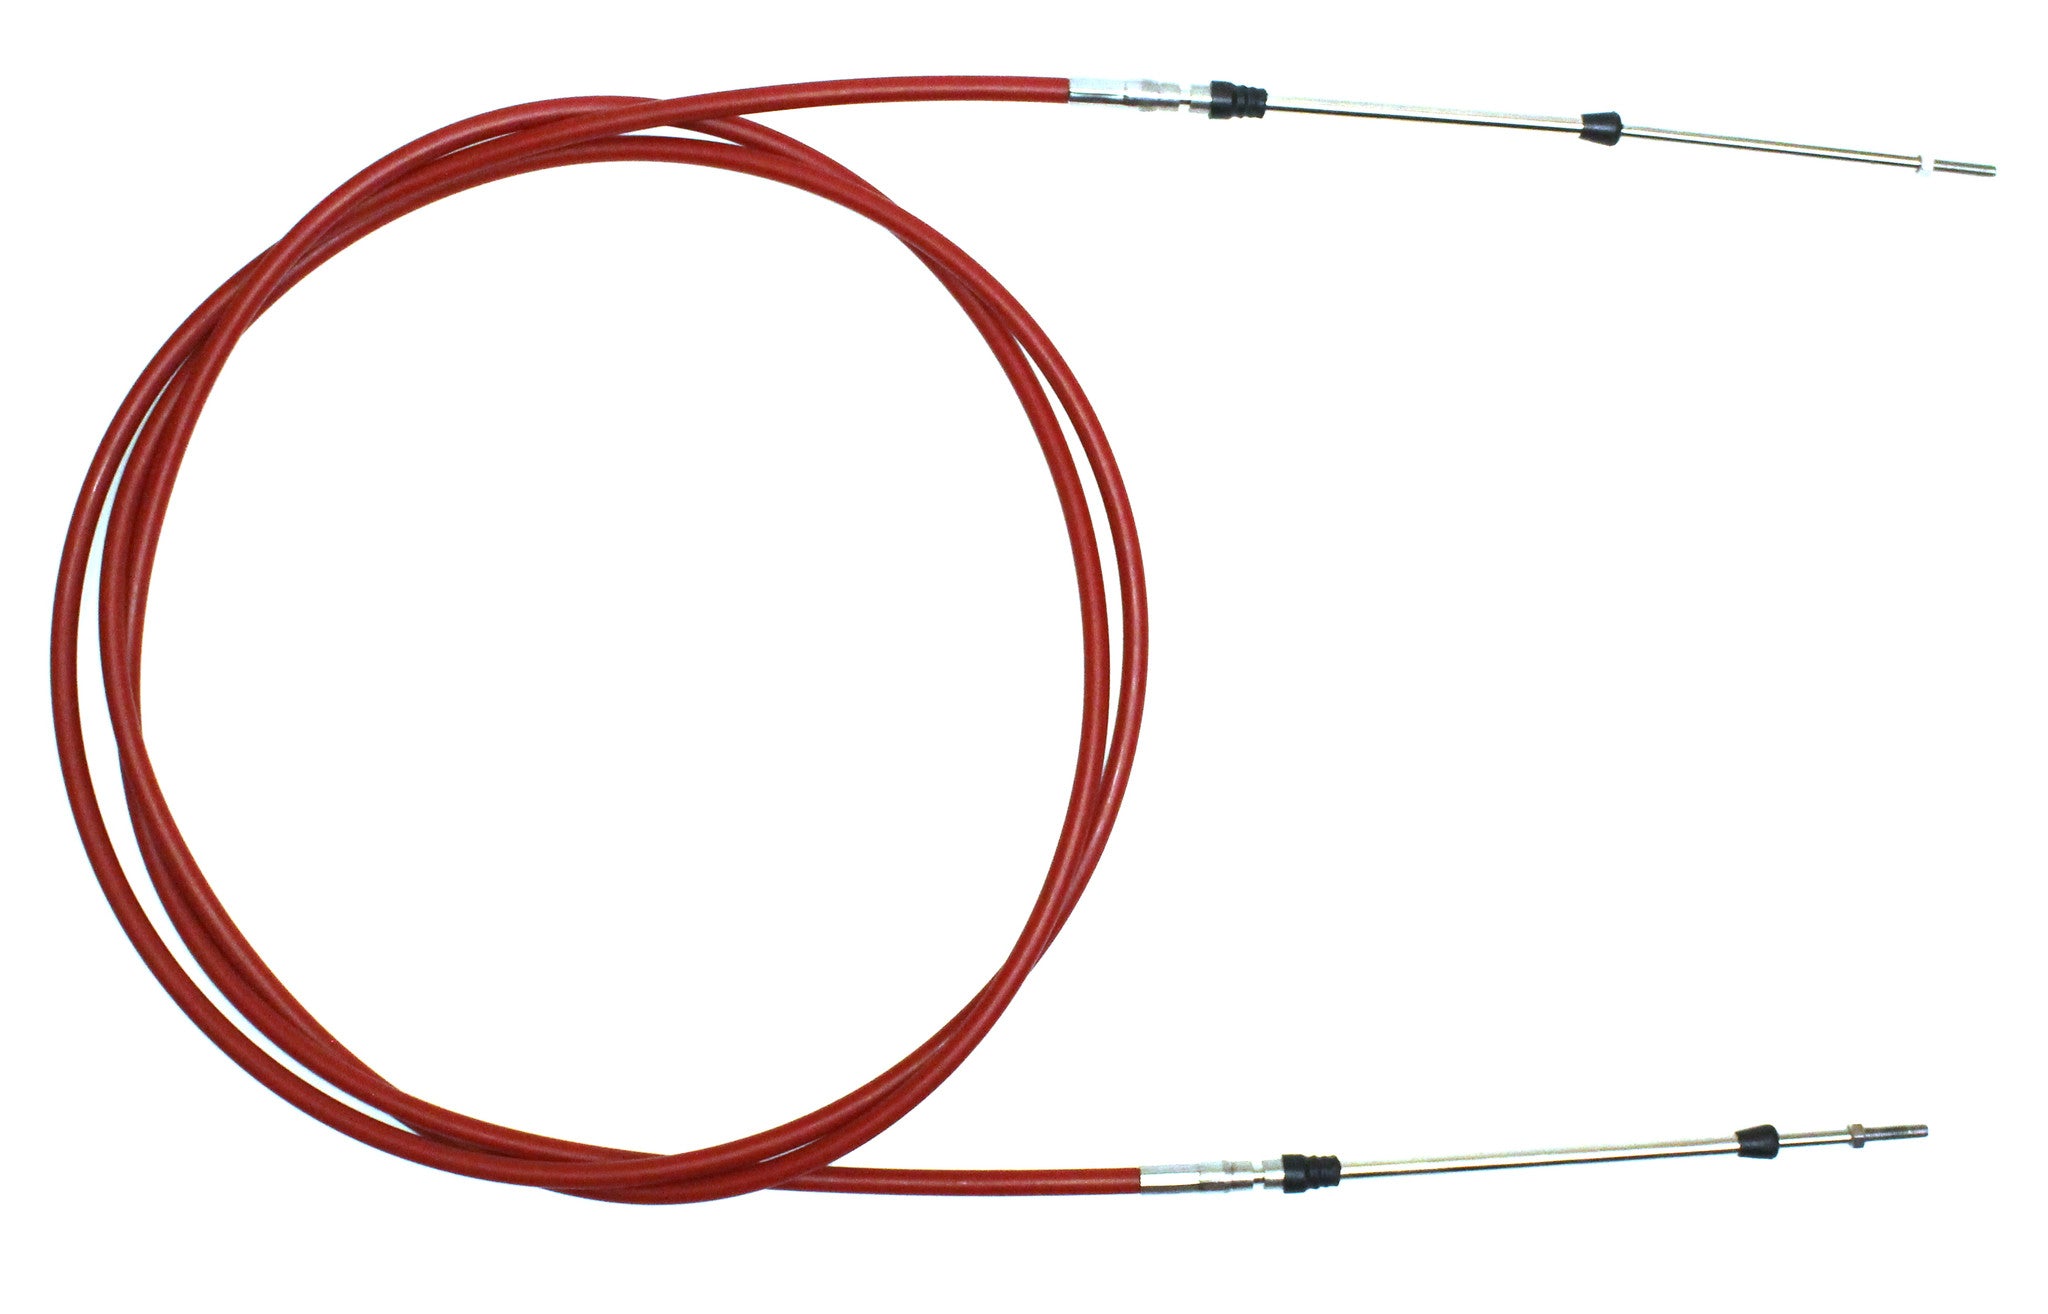 Aftermarket Steering Cable JSP Brand YC-14 Replacement for Yamaha